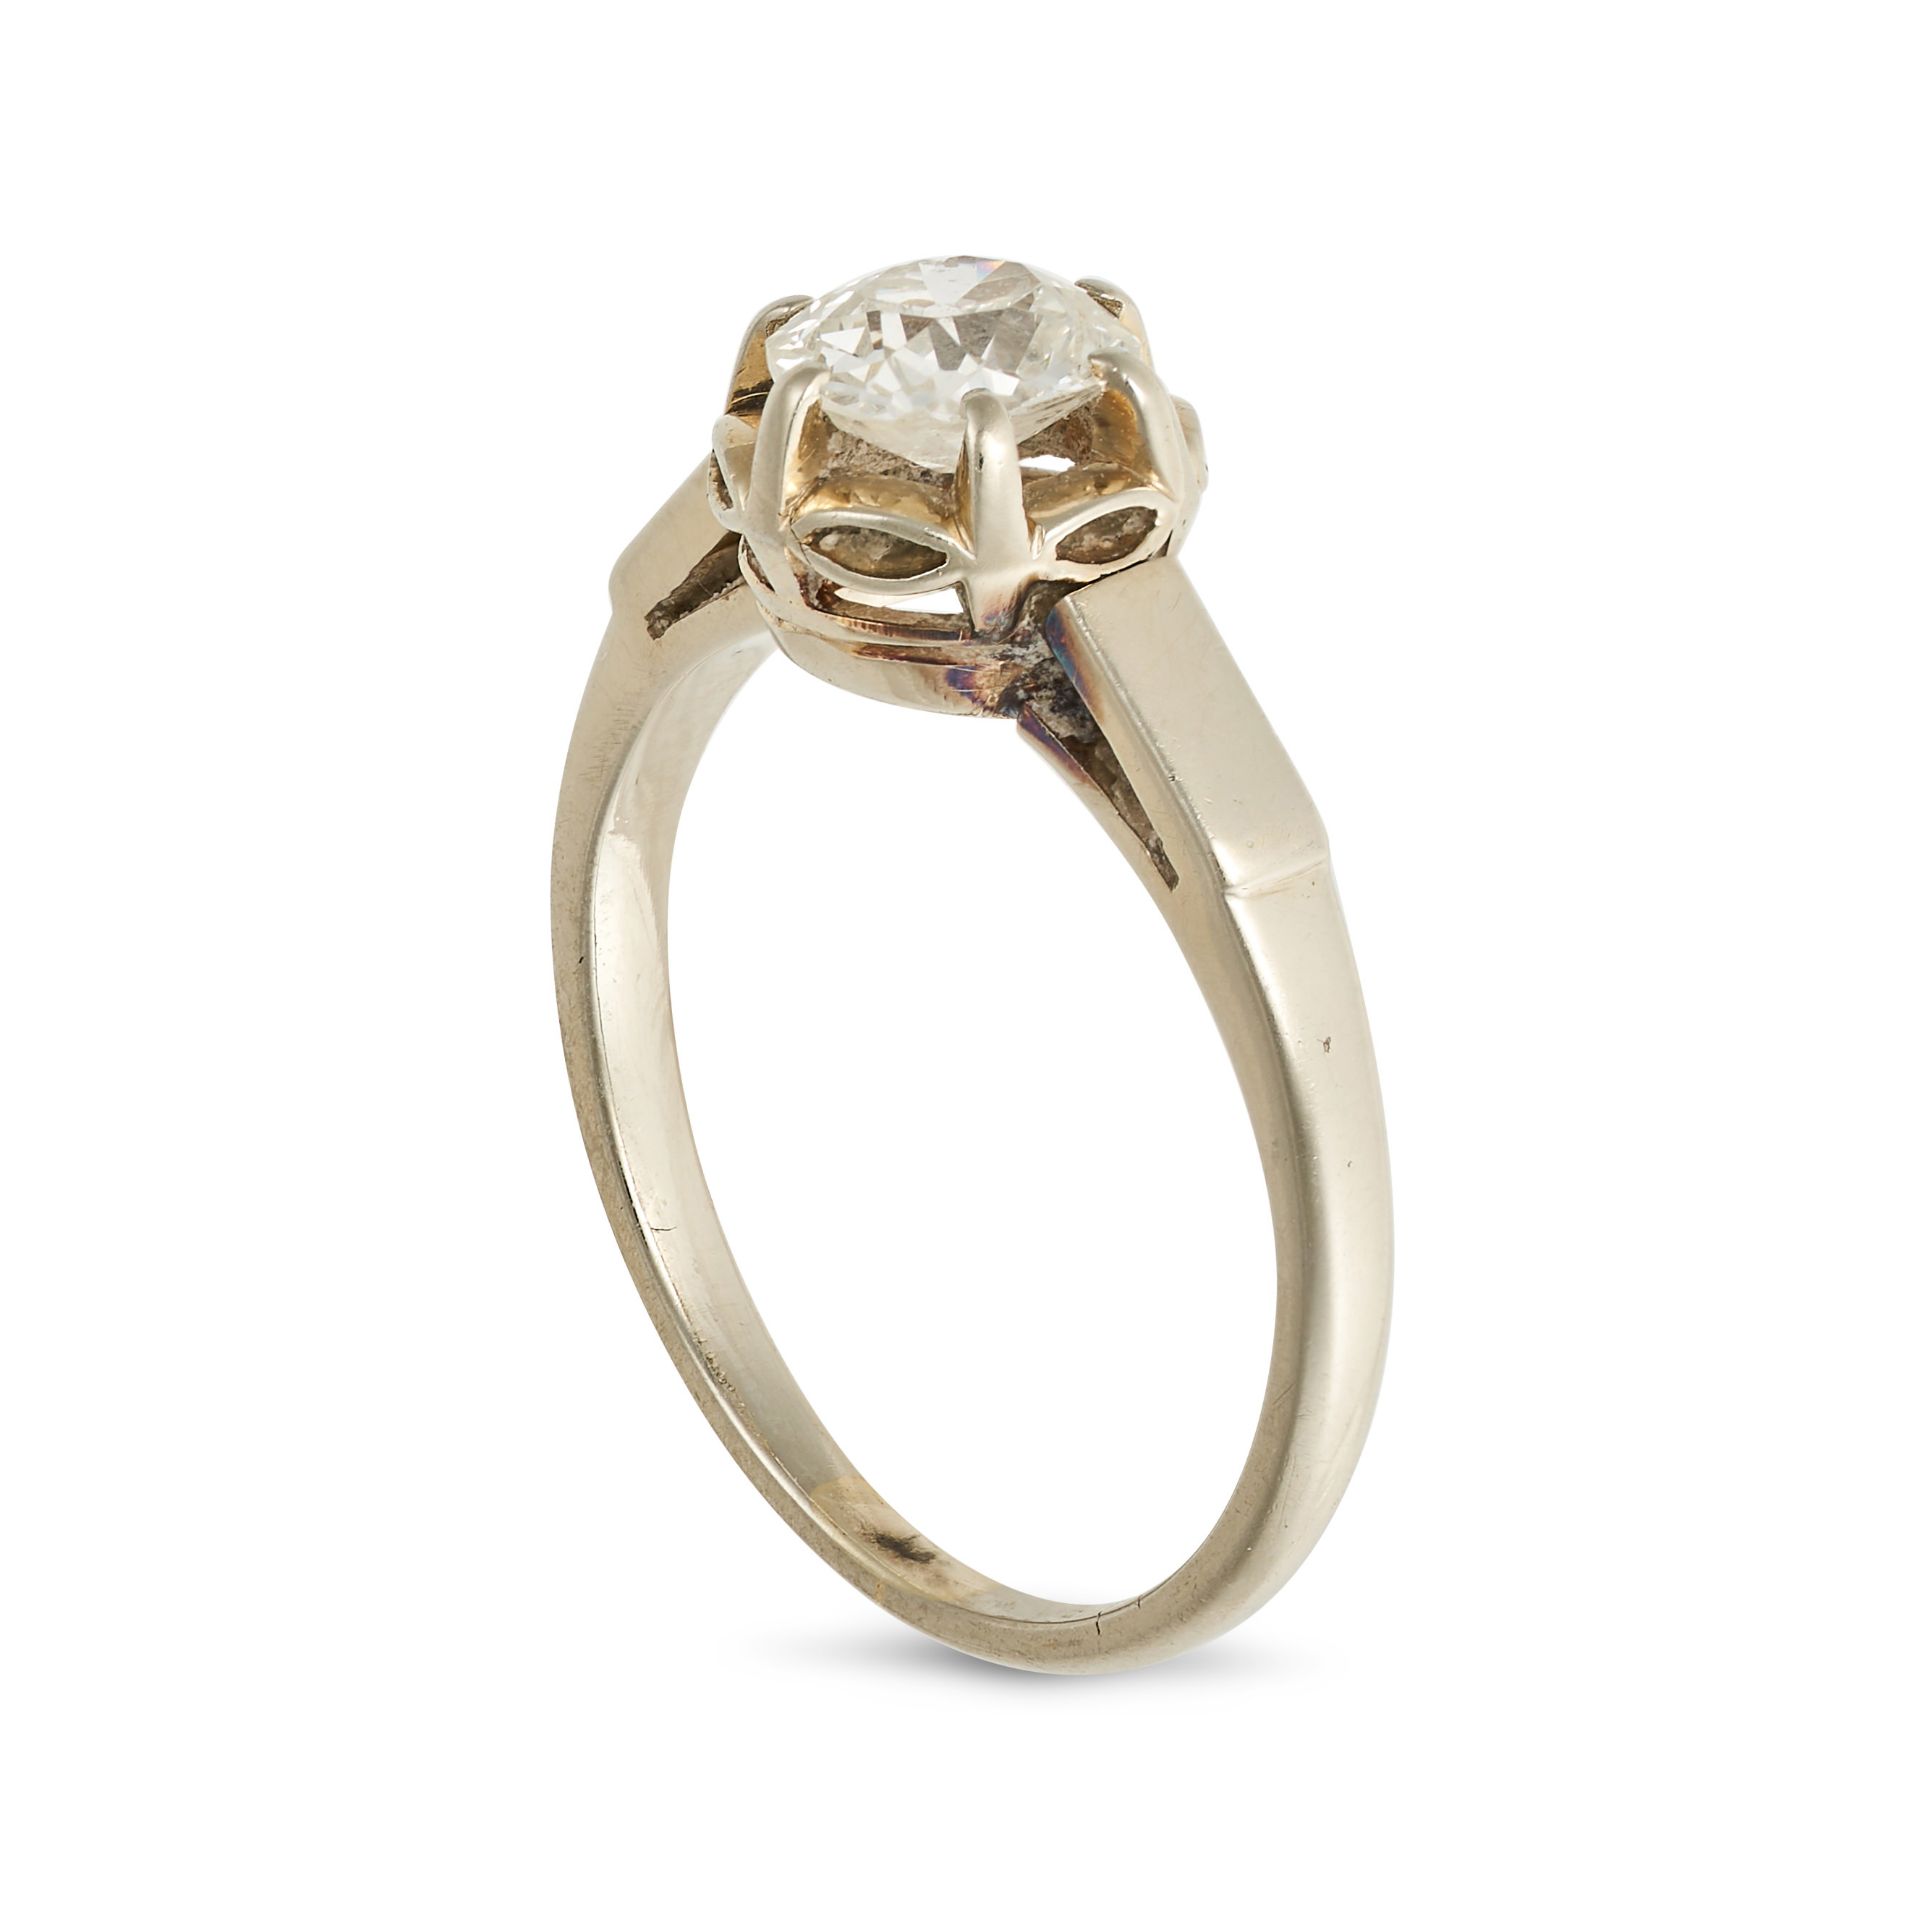 A SOLITAIRE DIAMOND RING in 18ct white gold, set with an old cut diamond of approximately 0.95 ca... - Image 2 of 2